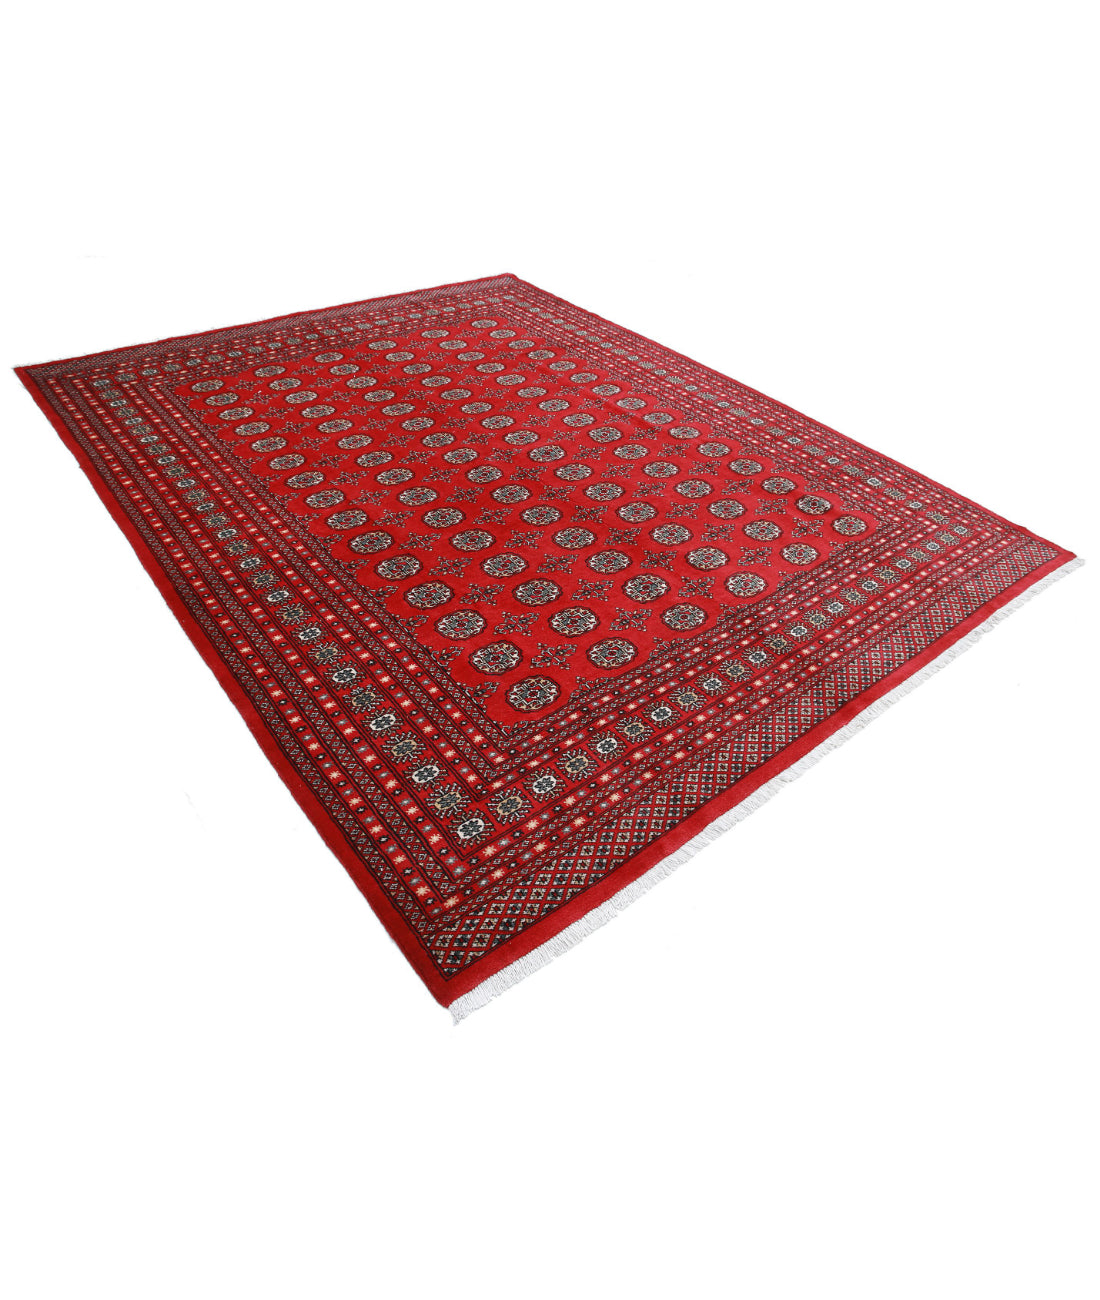 Hand Knotted Tribal Bokhara Wool Rug - 8'1'' x 10'1'' 8'1'' x 10'1'' (243 X 303) / Red / Blue